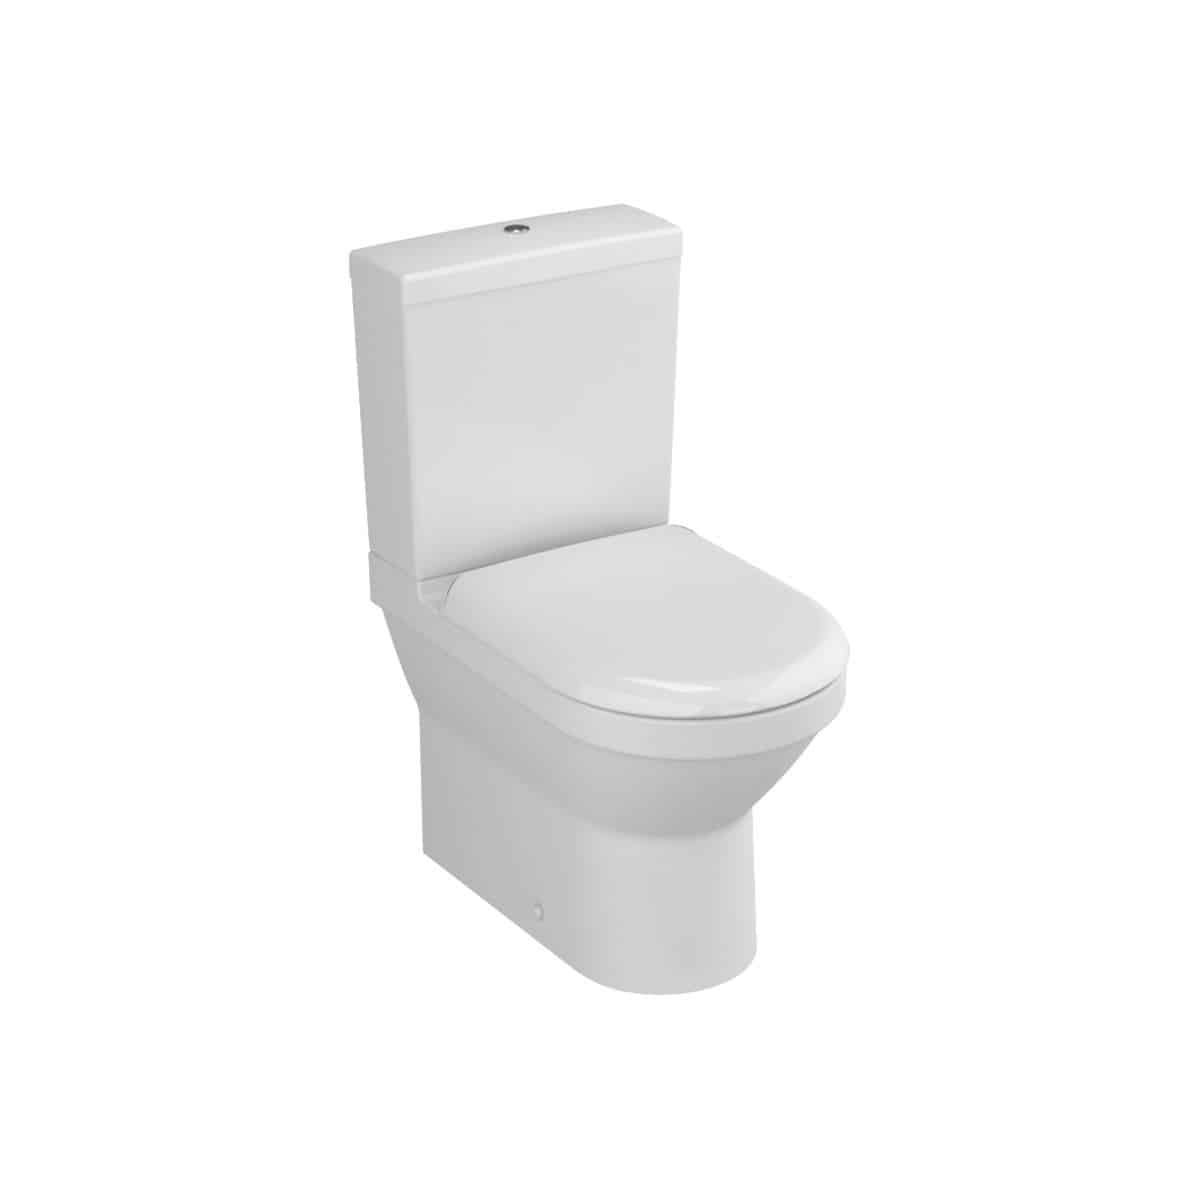 S50 Close Coupled WC Without Bidet Function, White